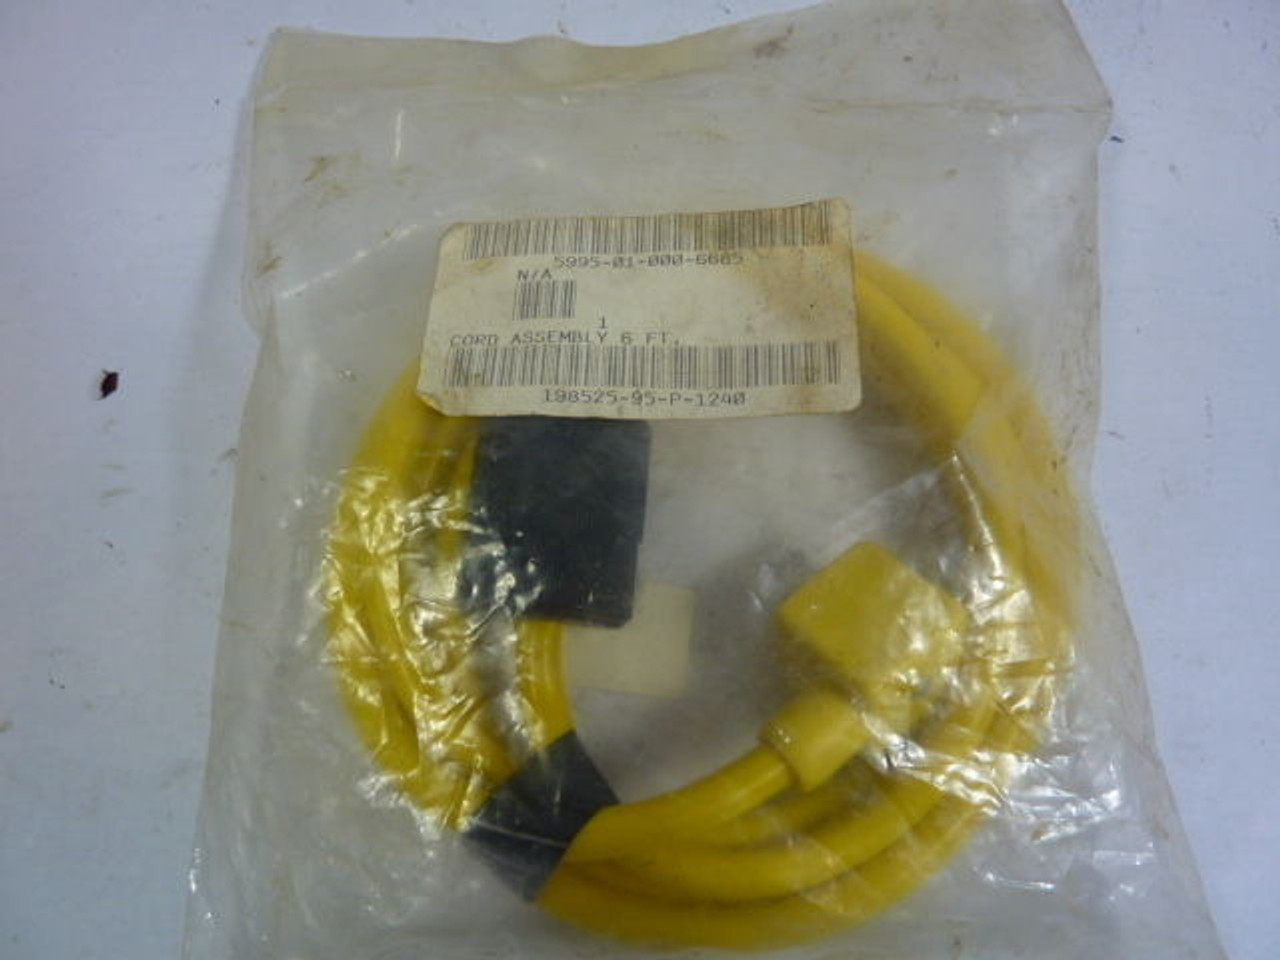 Molex 5995-01-000-6685 (198525-95-P-1240) Cord Assembly 6-Foot Cable ! NEW !